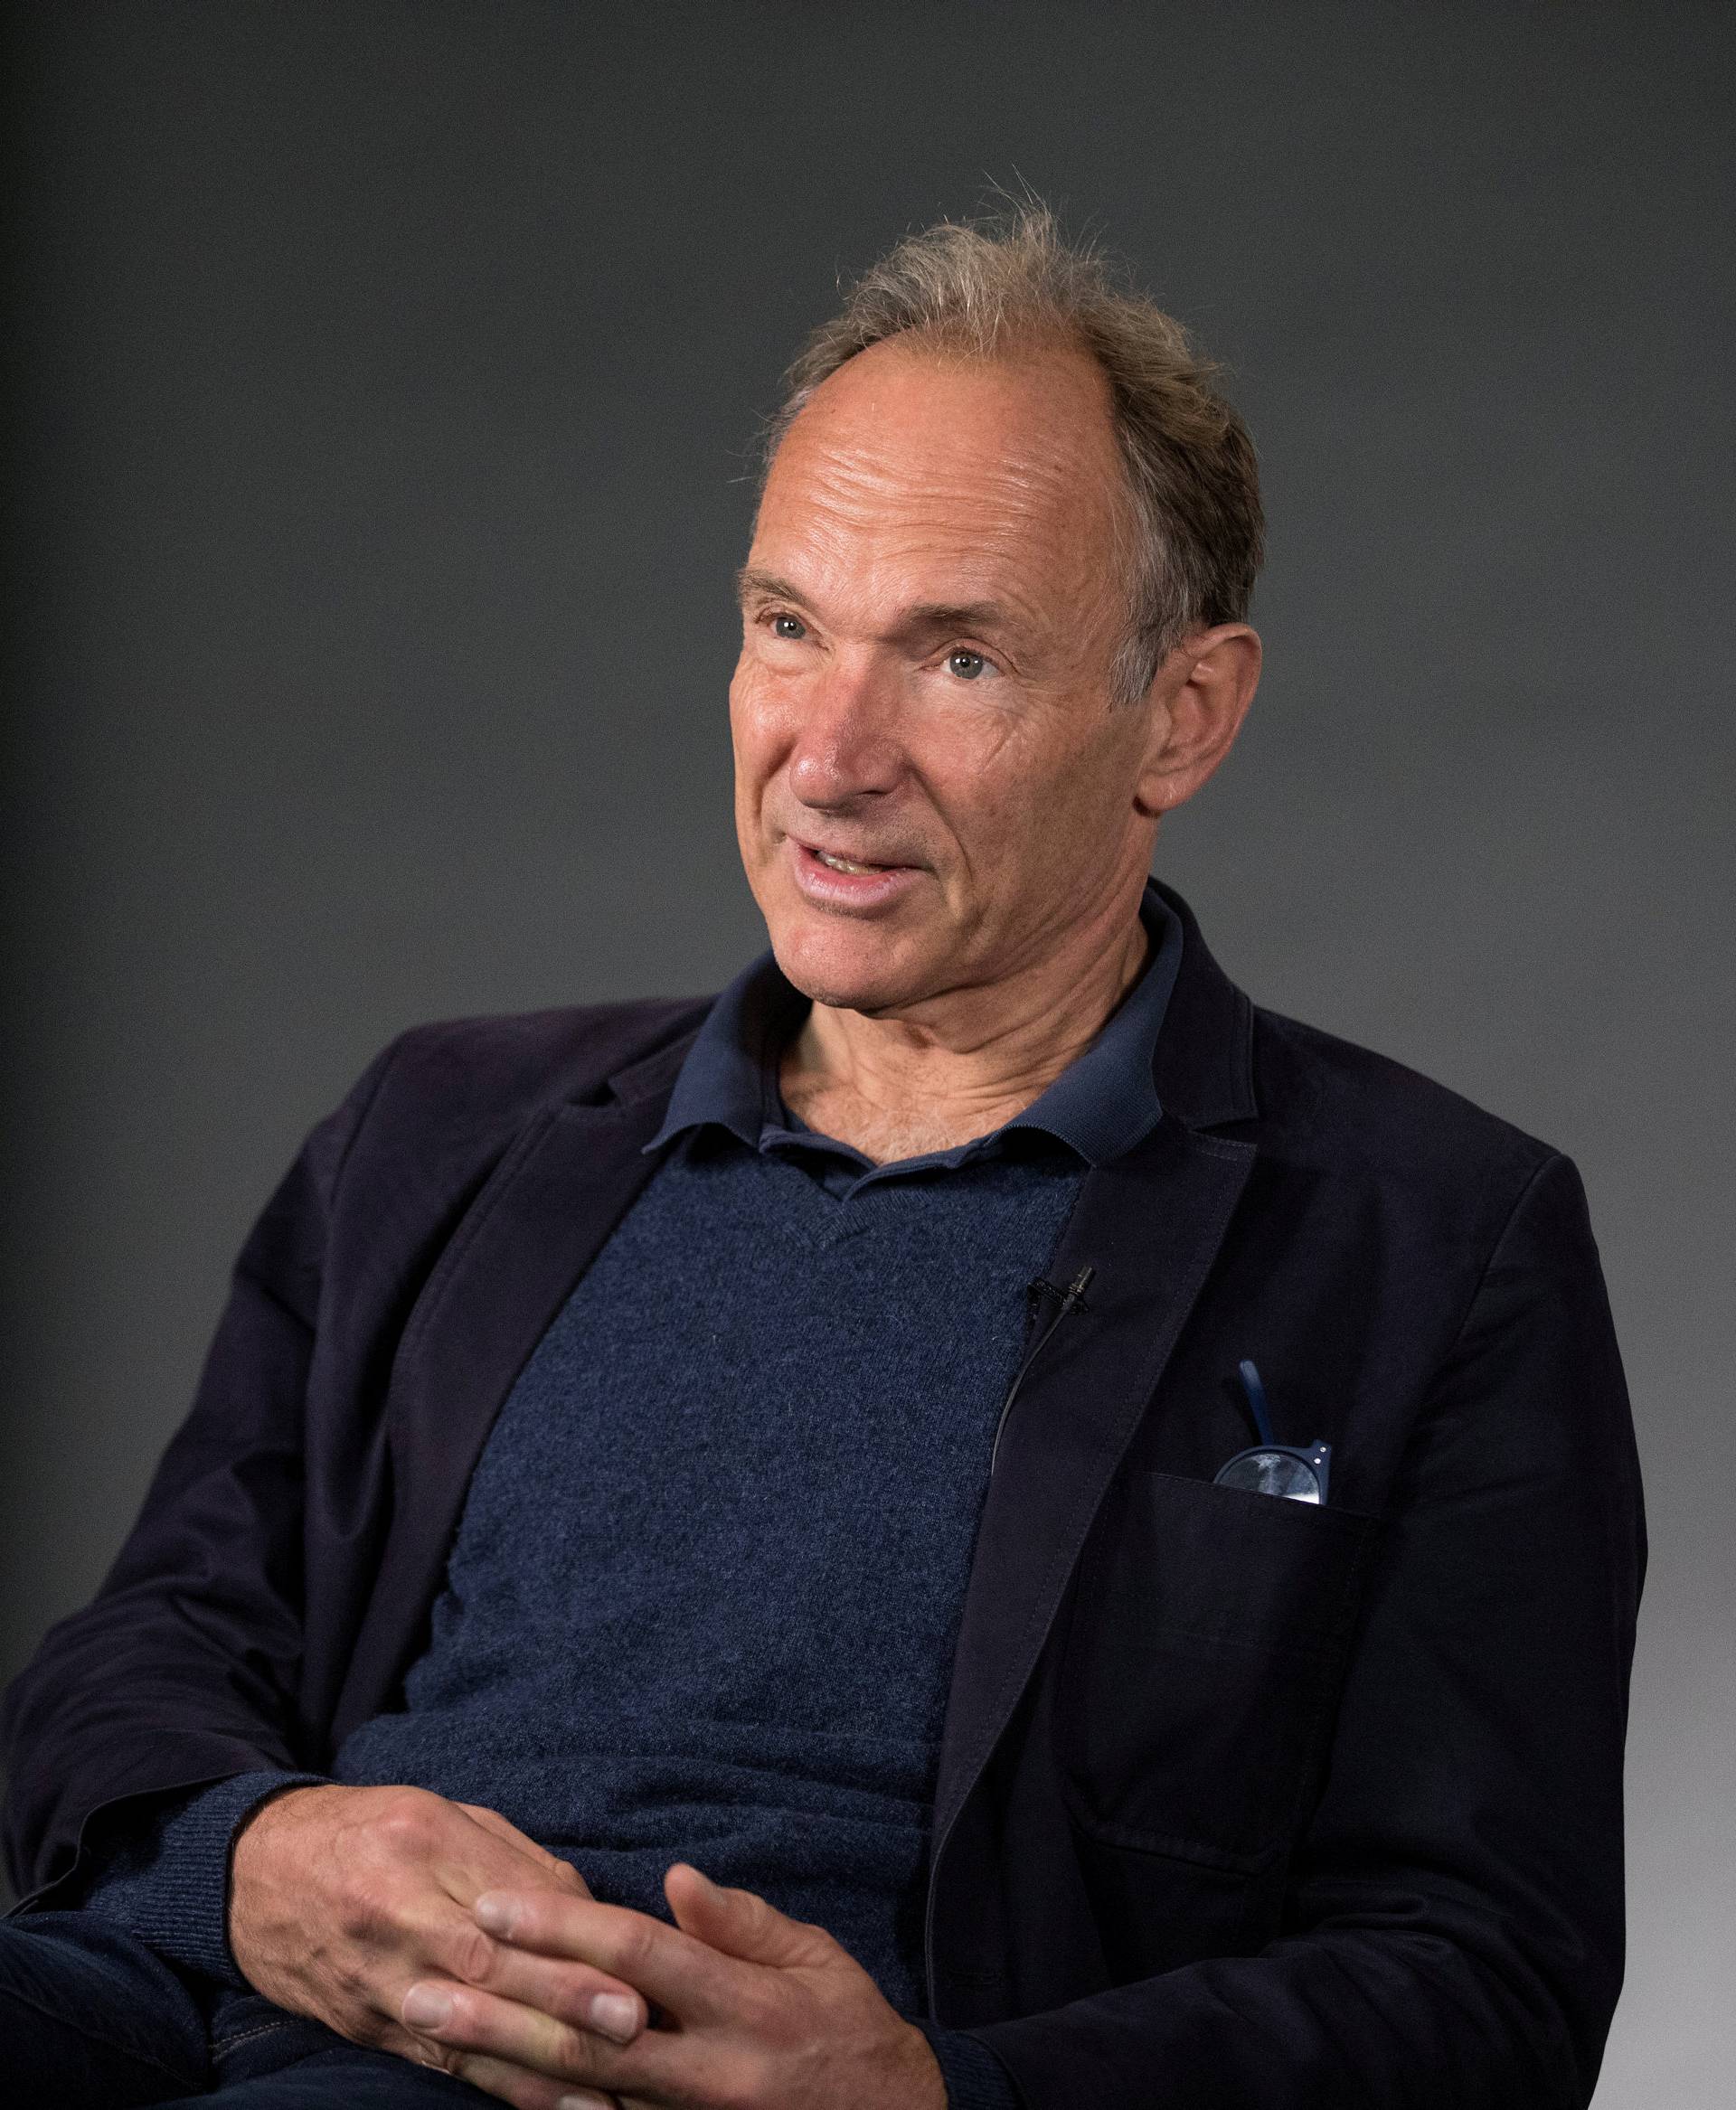 FILE PHOTO: World Wide Web founder Tim Berners-Lee speaks during an interview at the Mozilla Festival 2018 in London